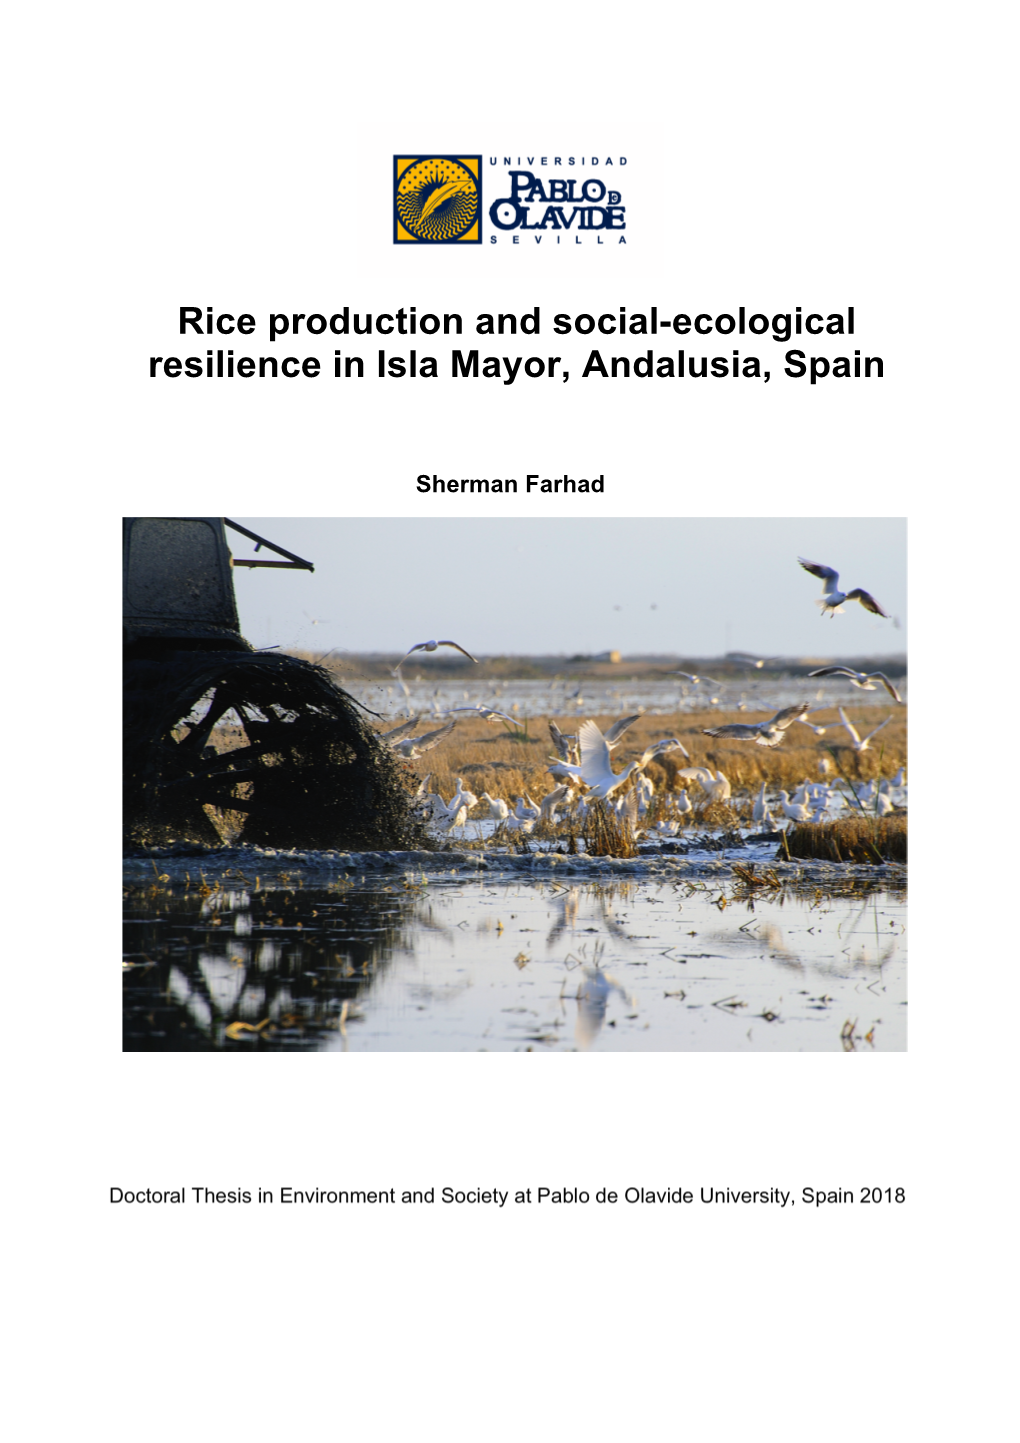 Rice Production and Social-Ecological Resilience in Isla Mayor, Andalusia, Spain